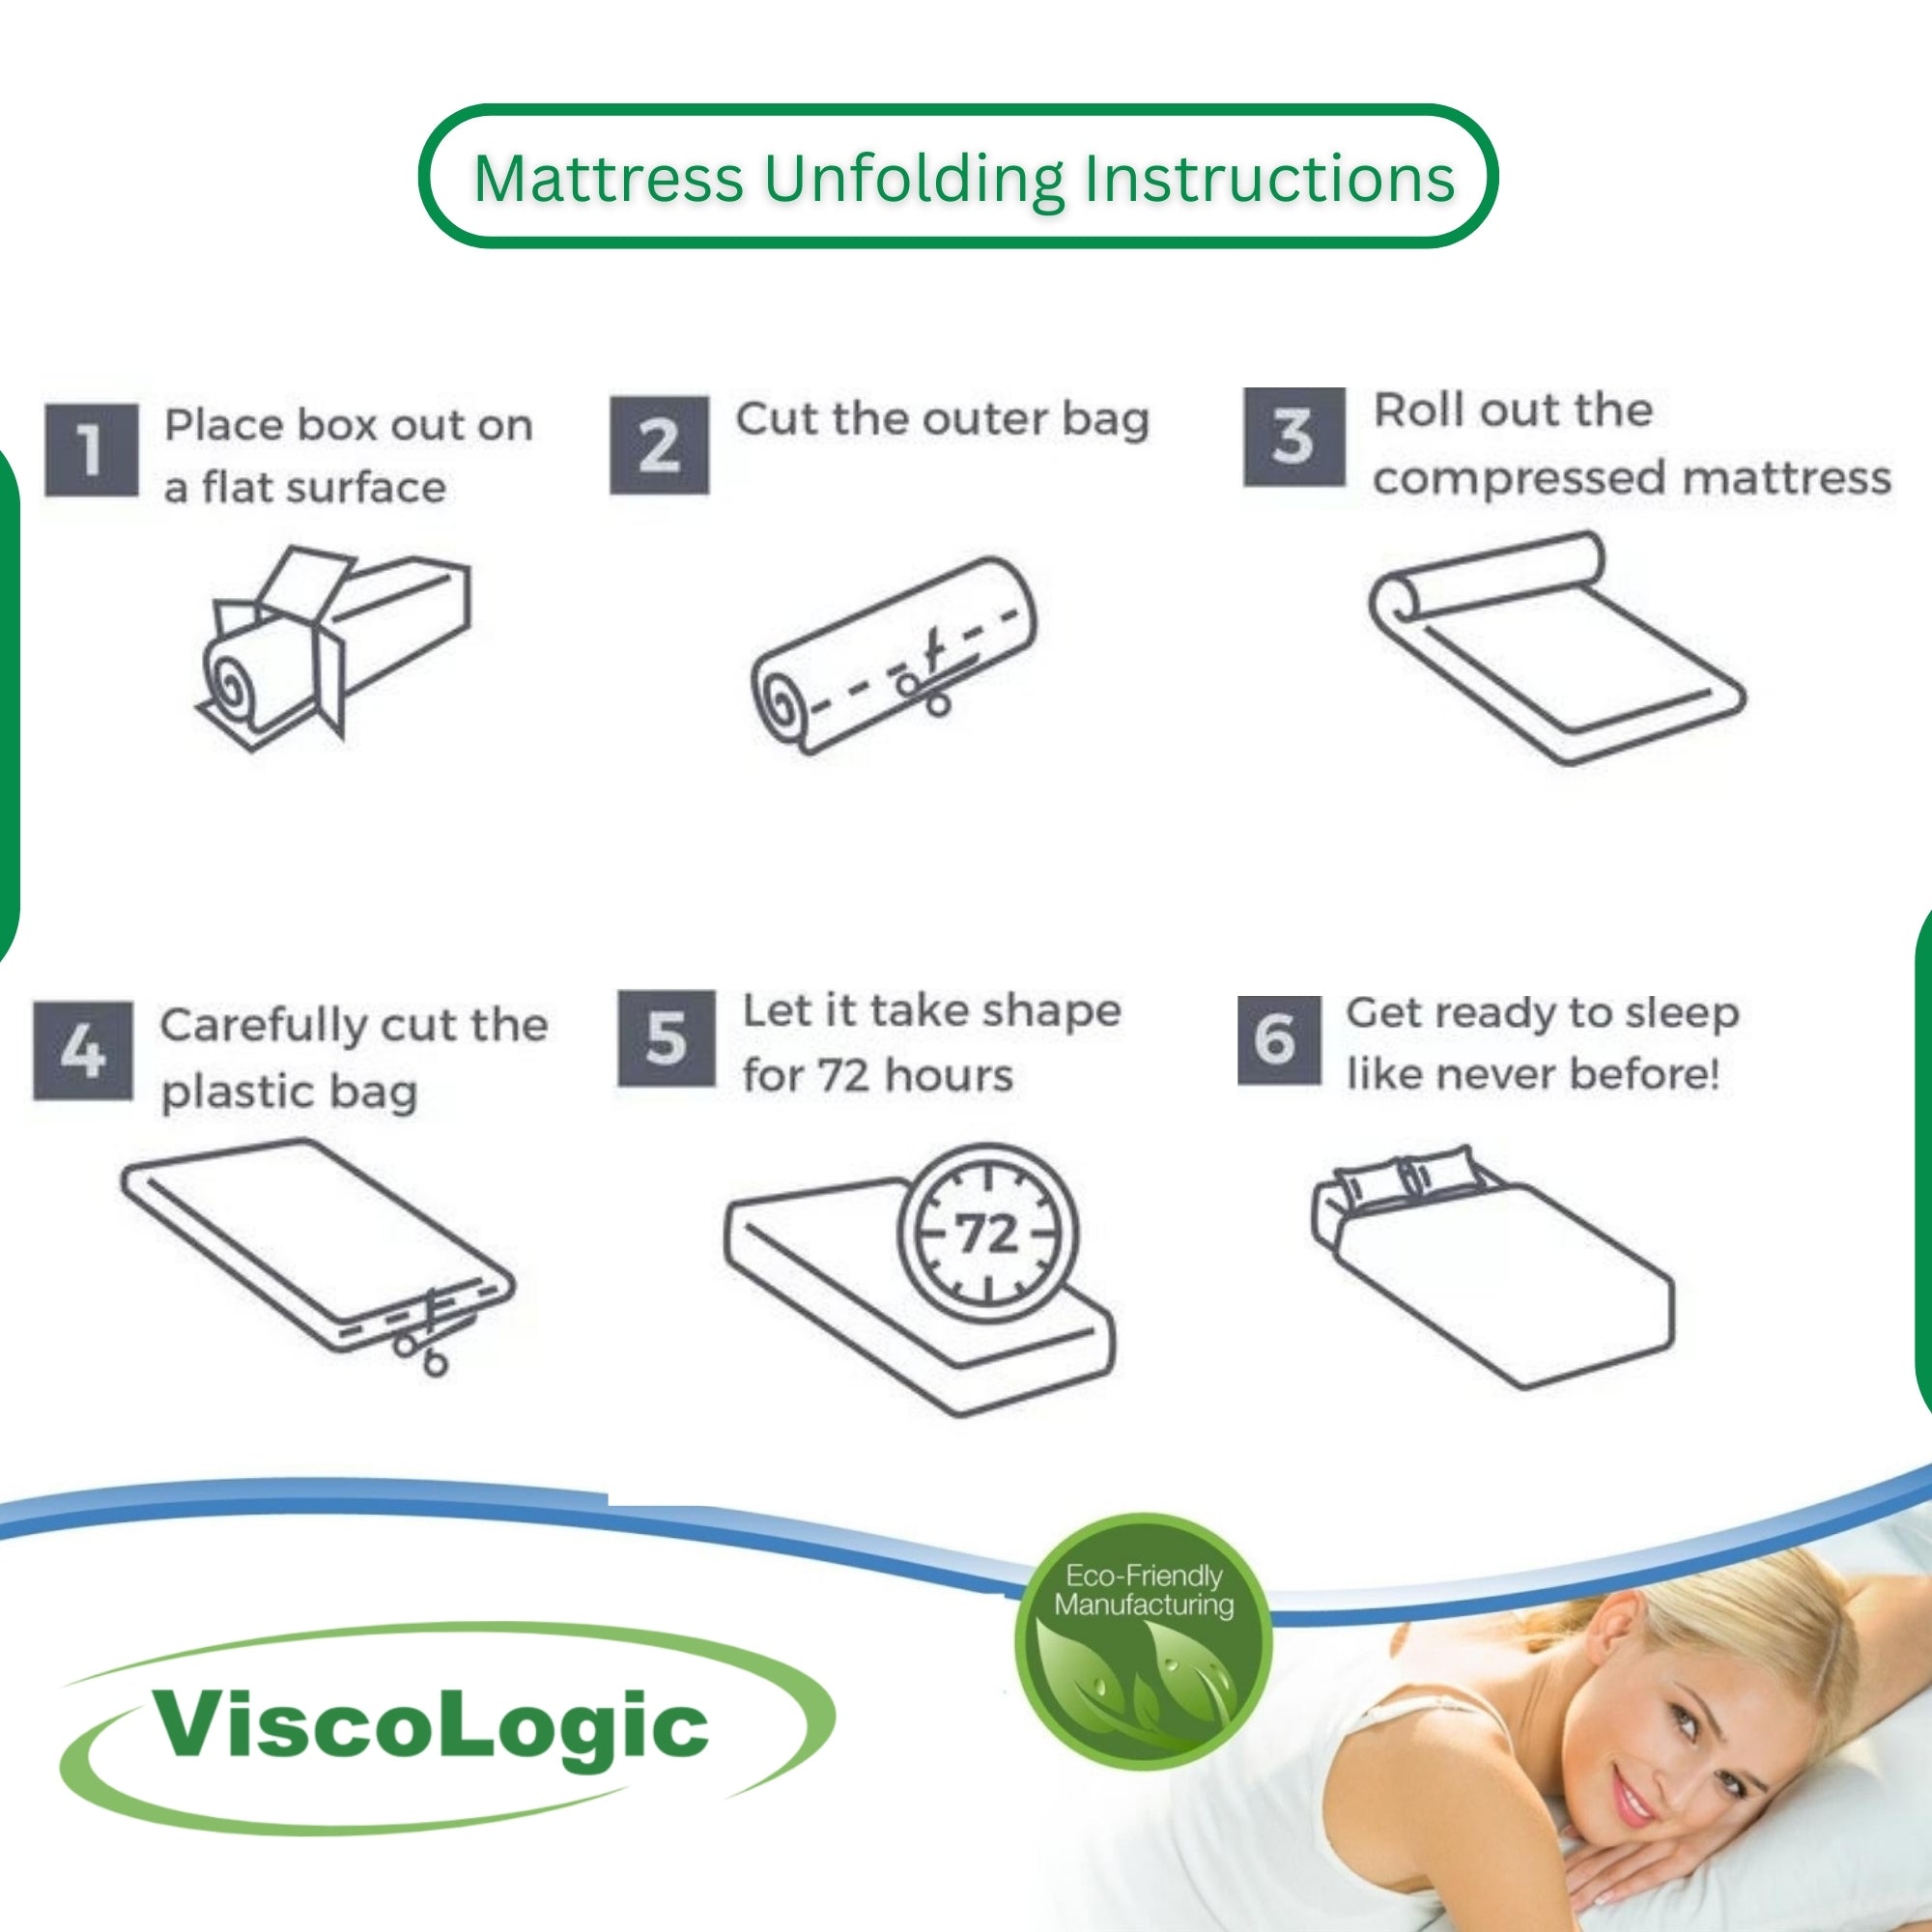 ViscoLogic Elite 8-Inch Memory Foam Mattress with Soft Bamboo Feel Cover, Pressure Relieving Comfort, CertiPUR-US® Certified Foam